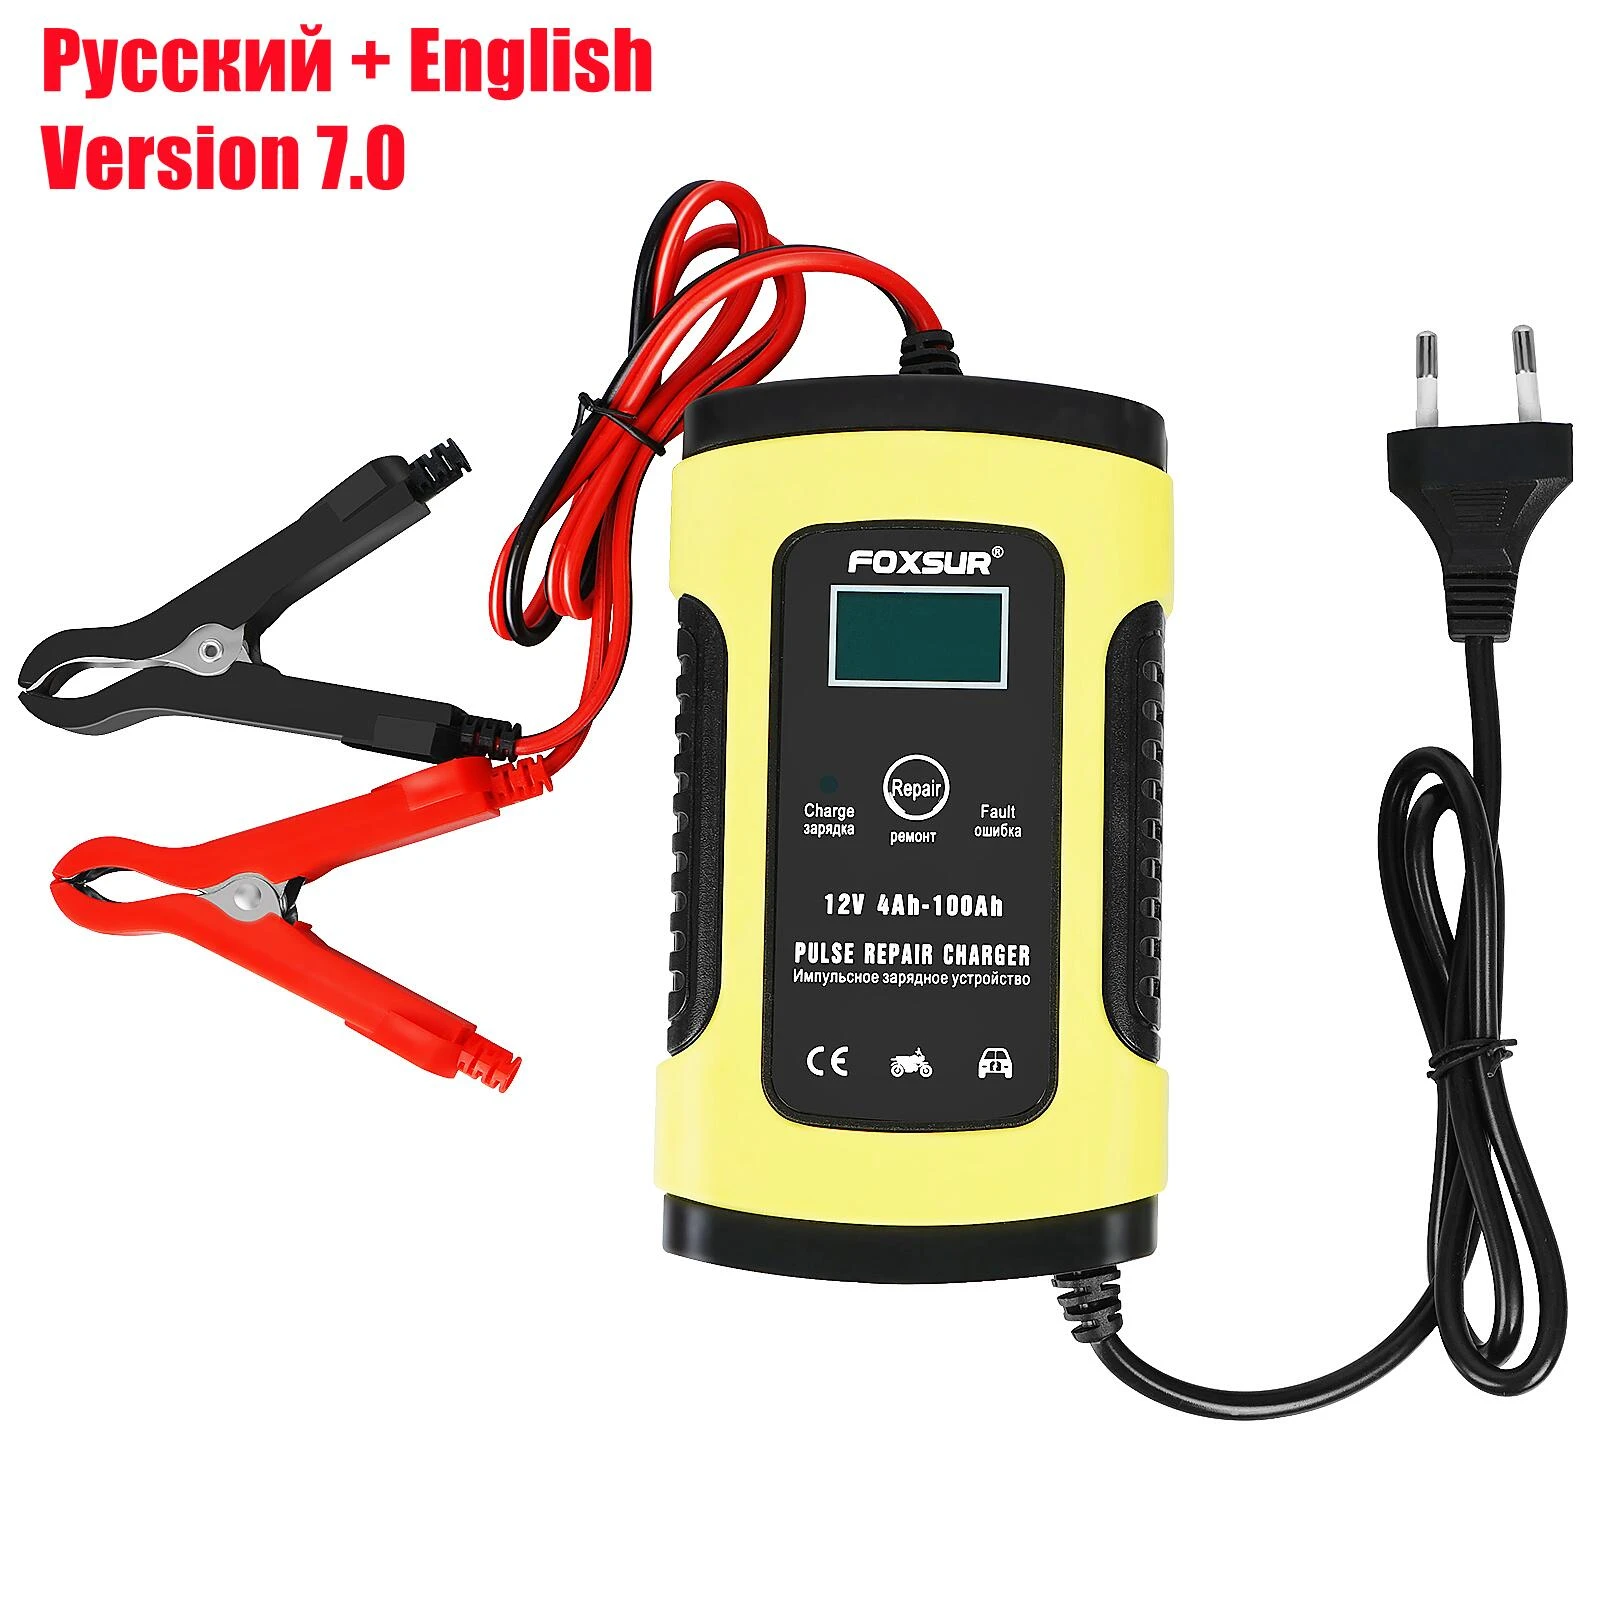 Full Automatic Car Battery Charger 110V to 220V To 12V 6A Intelligent Fast Power Charging Wet Dry Lead Acid Digital LCD Display